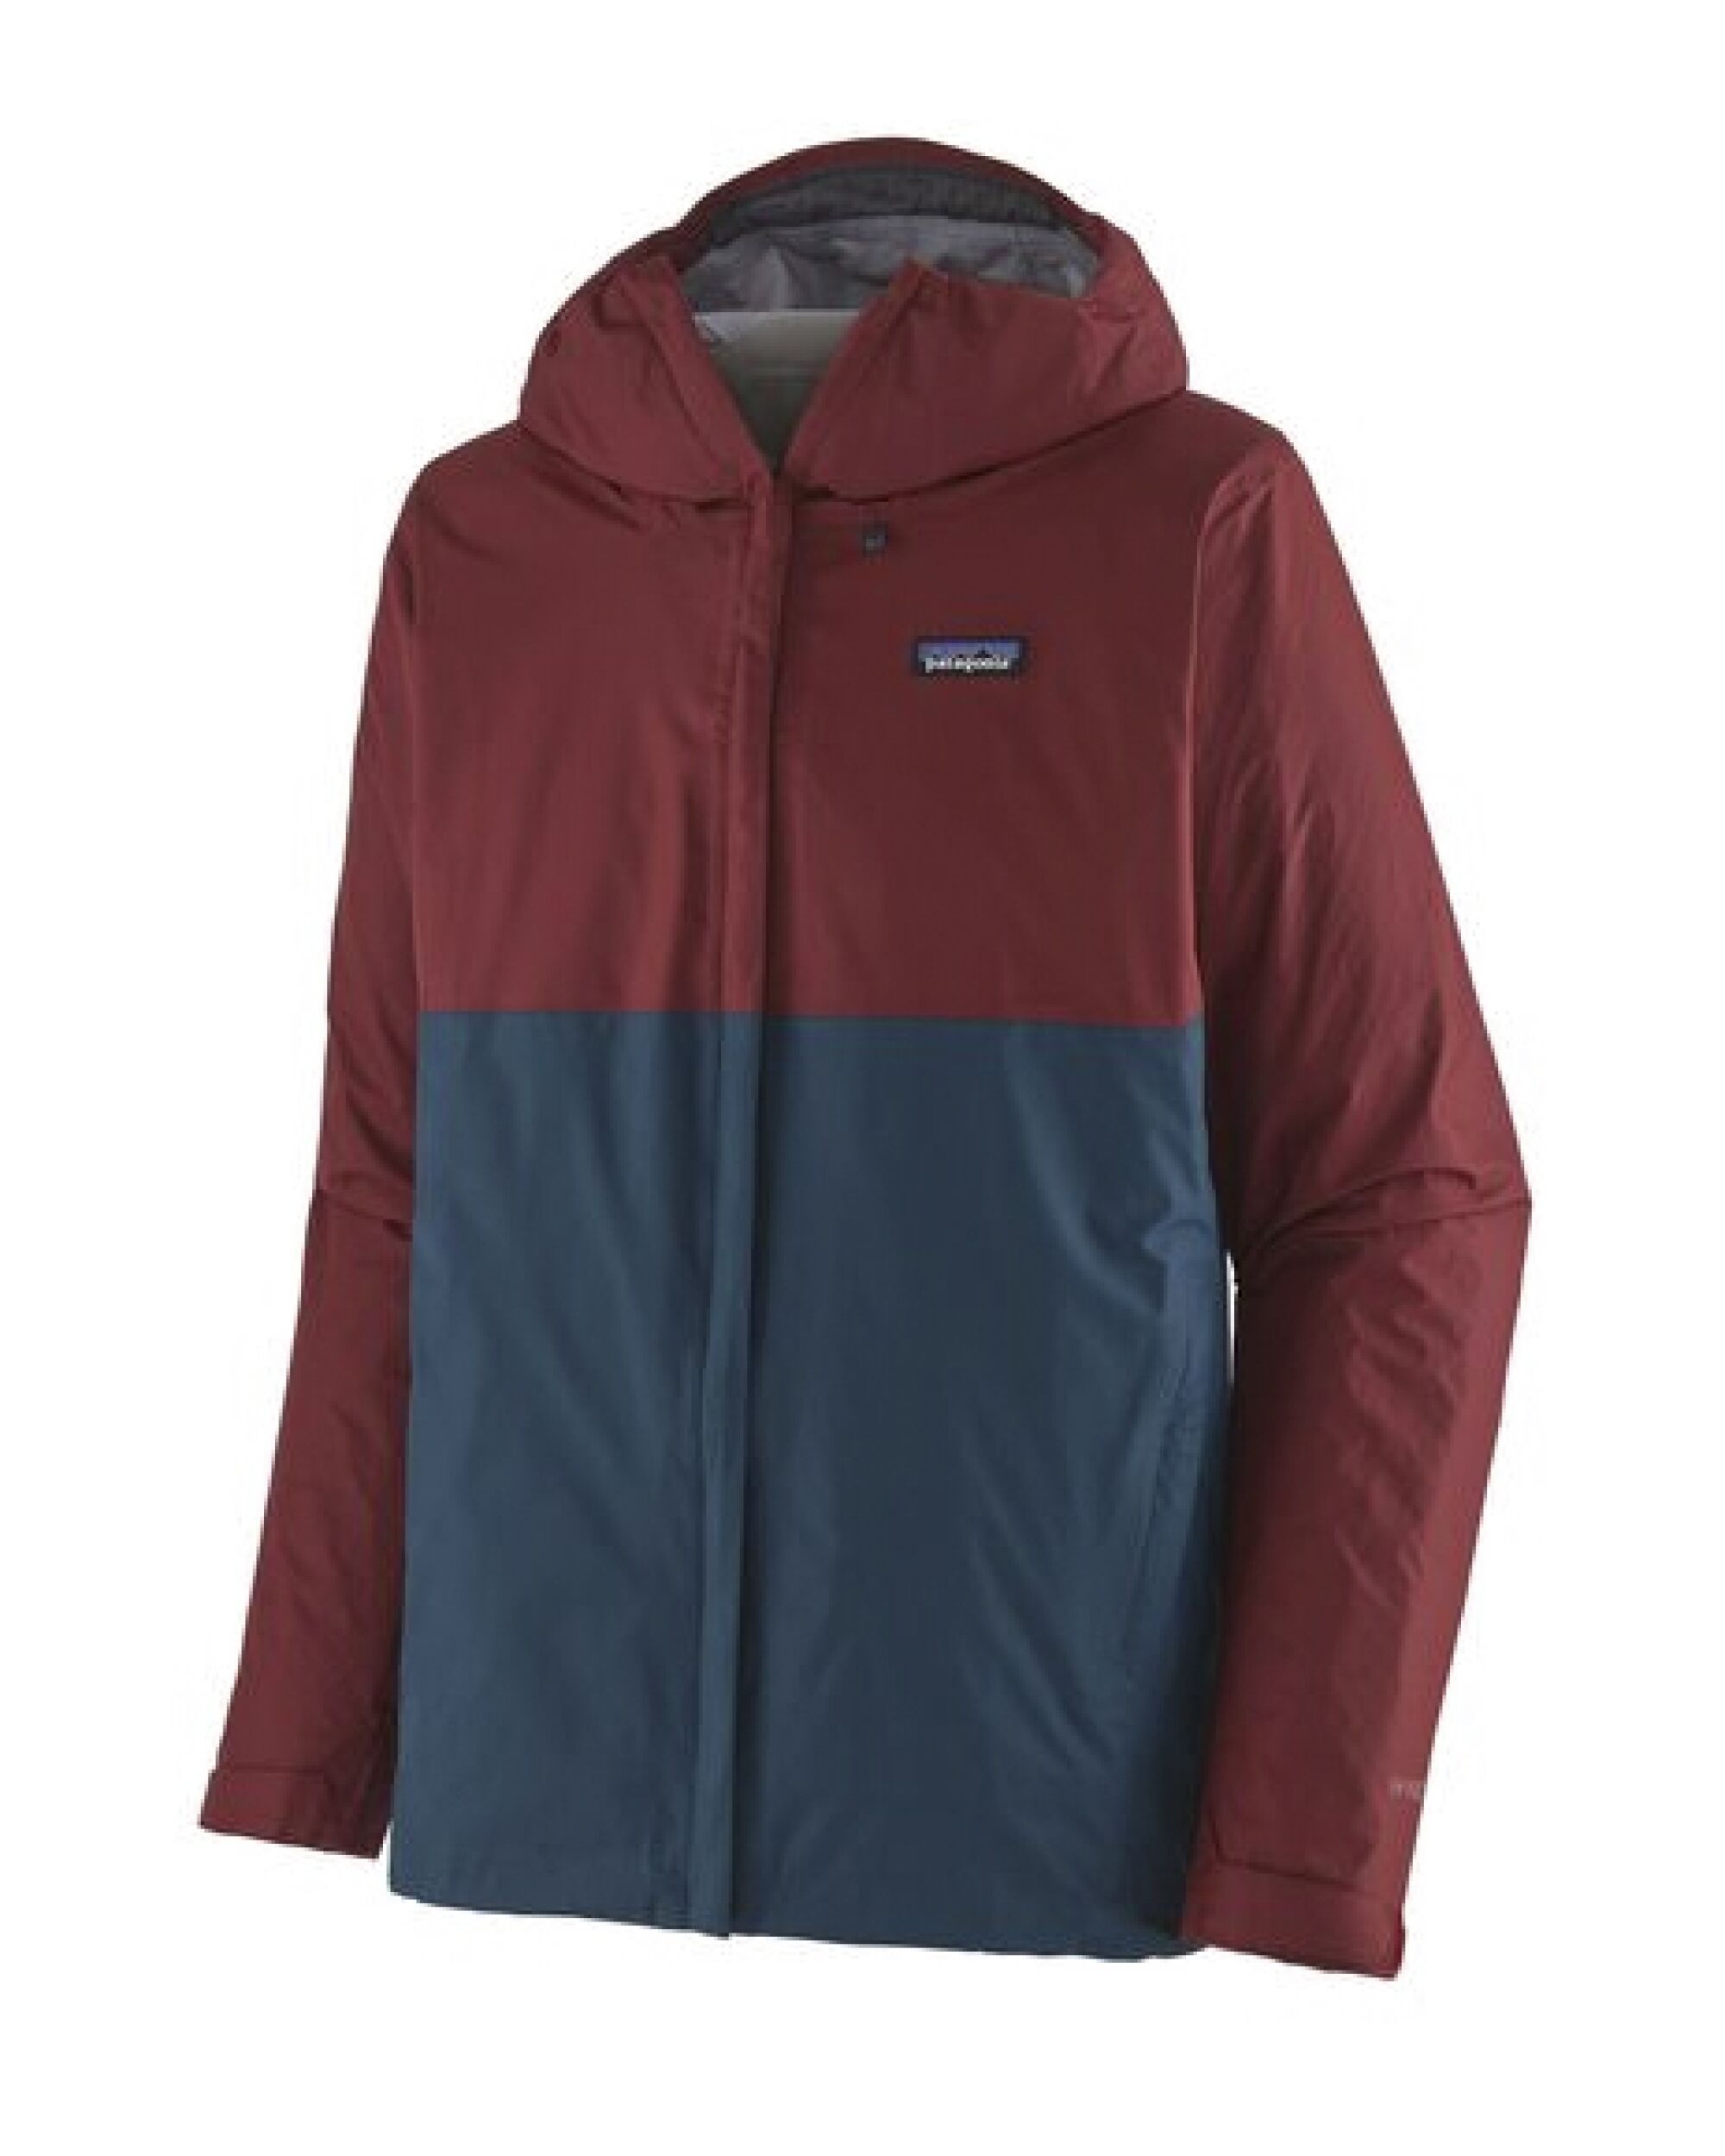 The Torrent Shell by Patagonia 